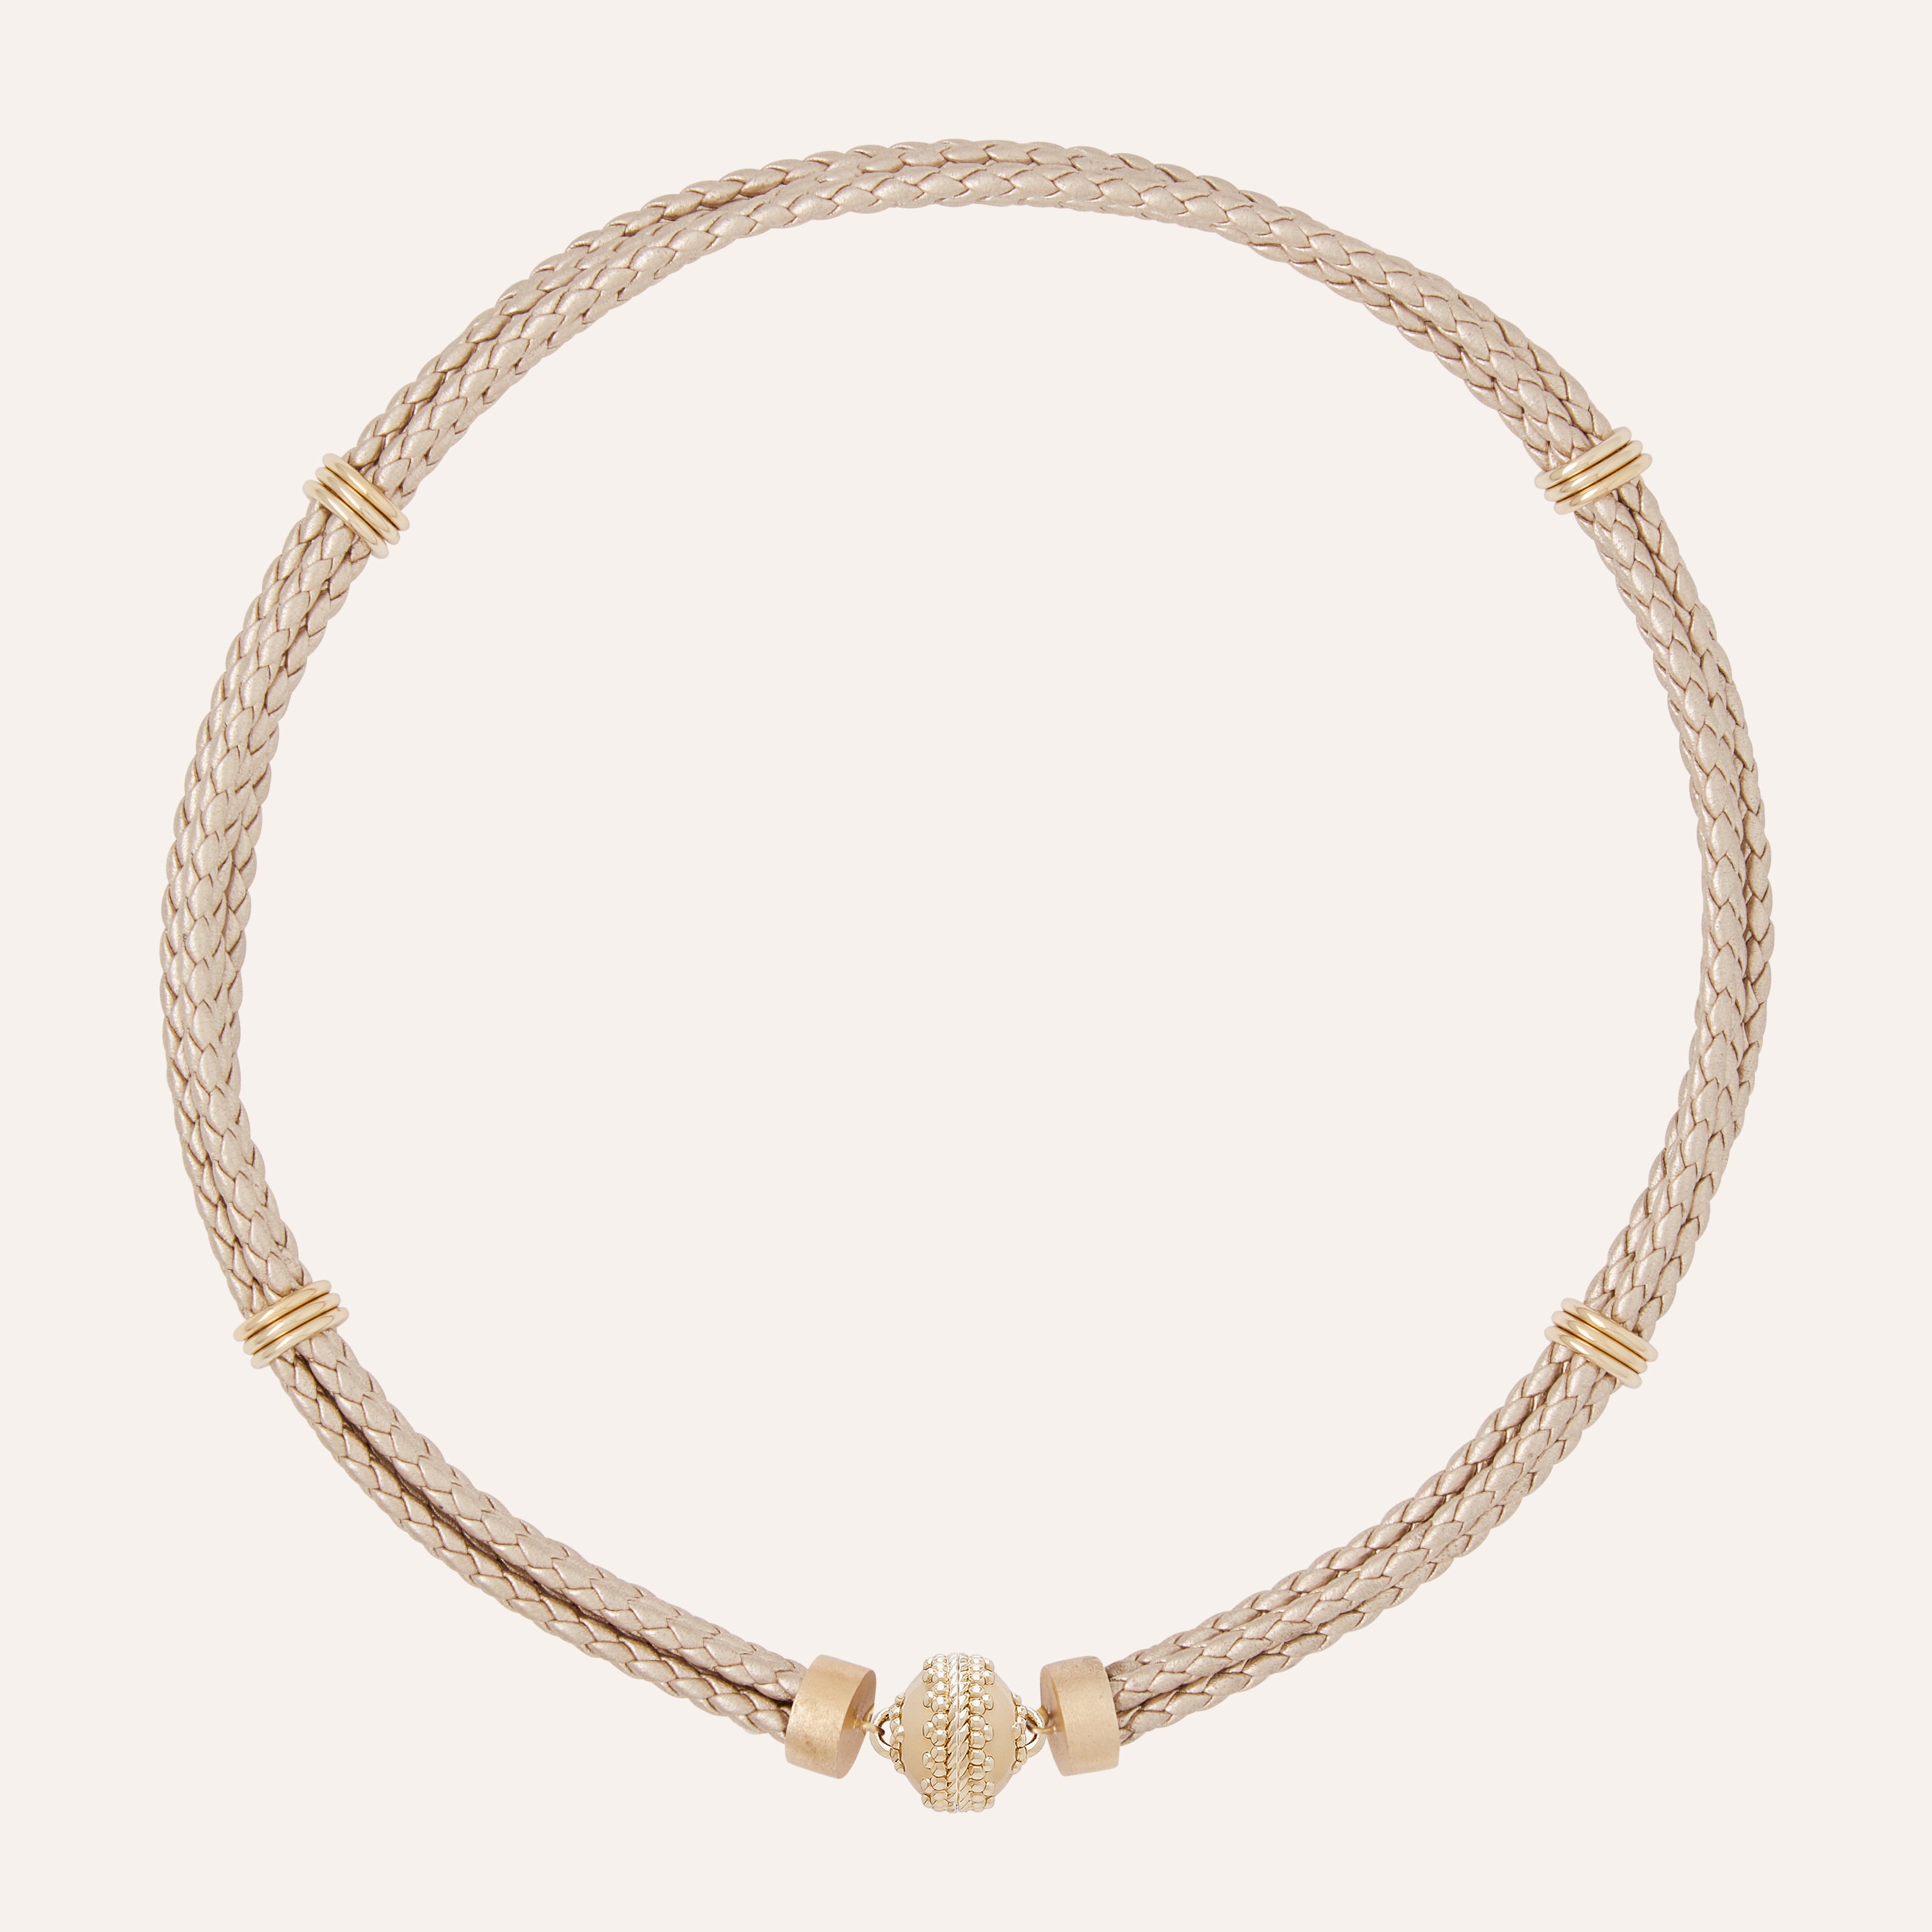 Aspen Braided Leather Brushed Gold Necklace